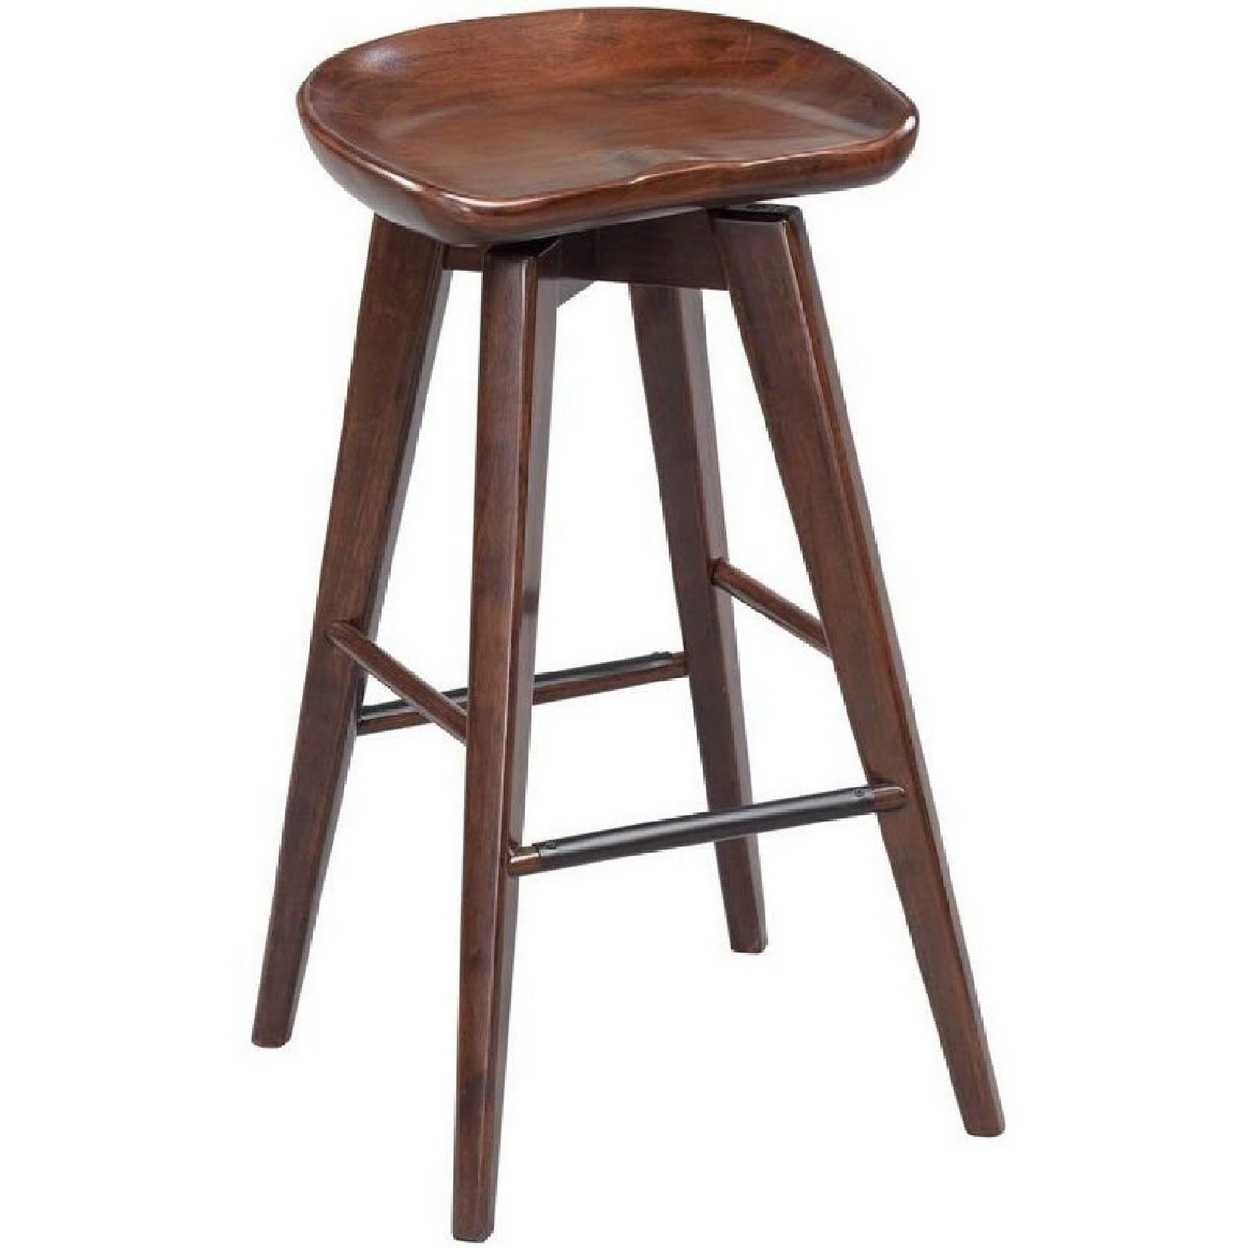 Contoured Seat Wooden Frame Swivel Barstool With Angled Legs, Natural Brown- Saltoro Sherpi